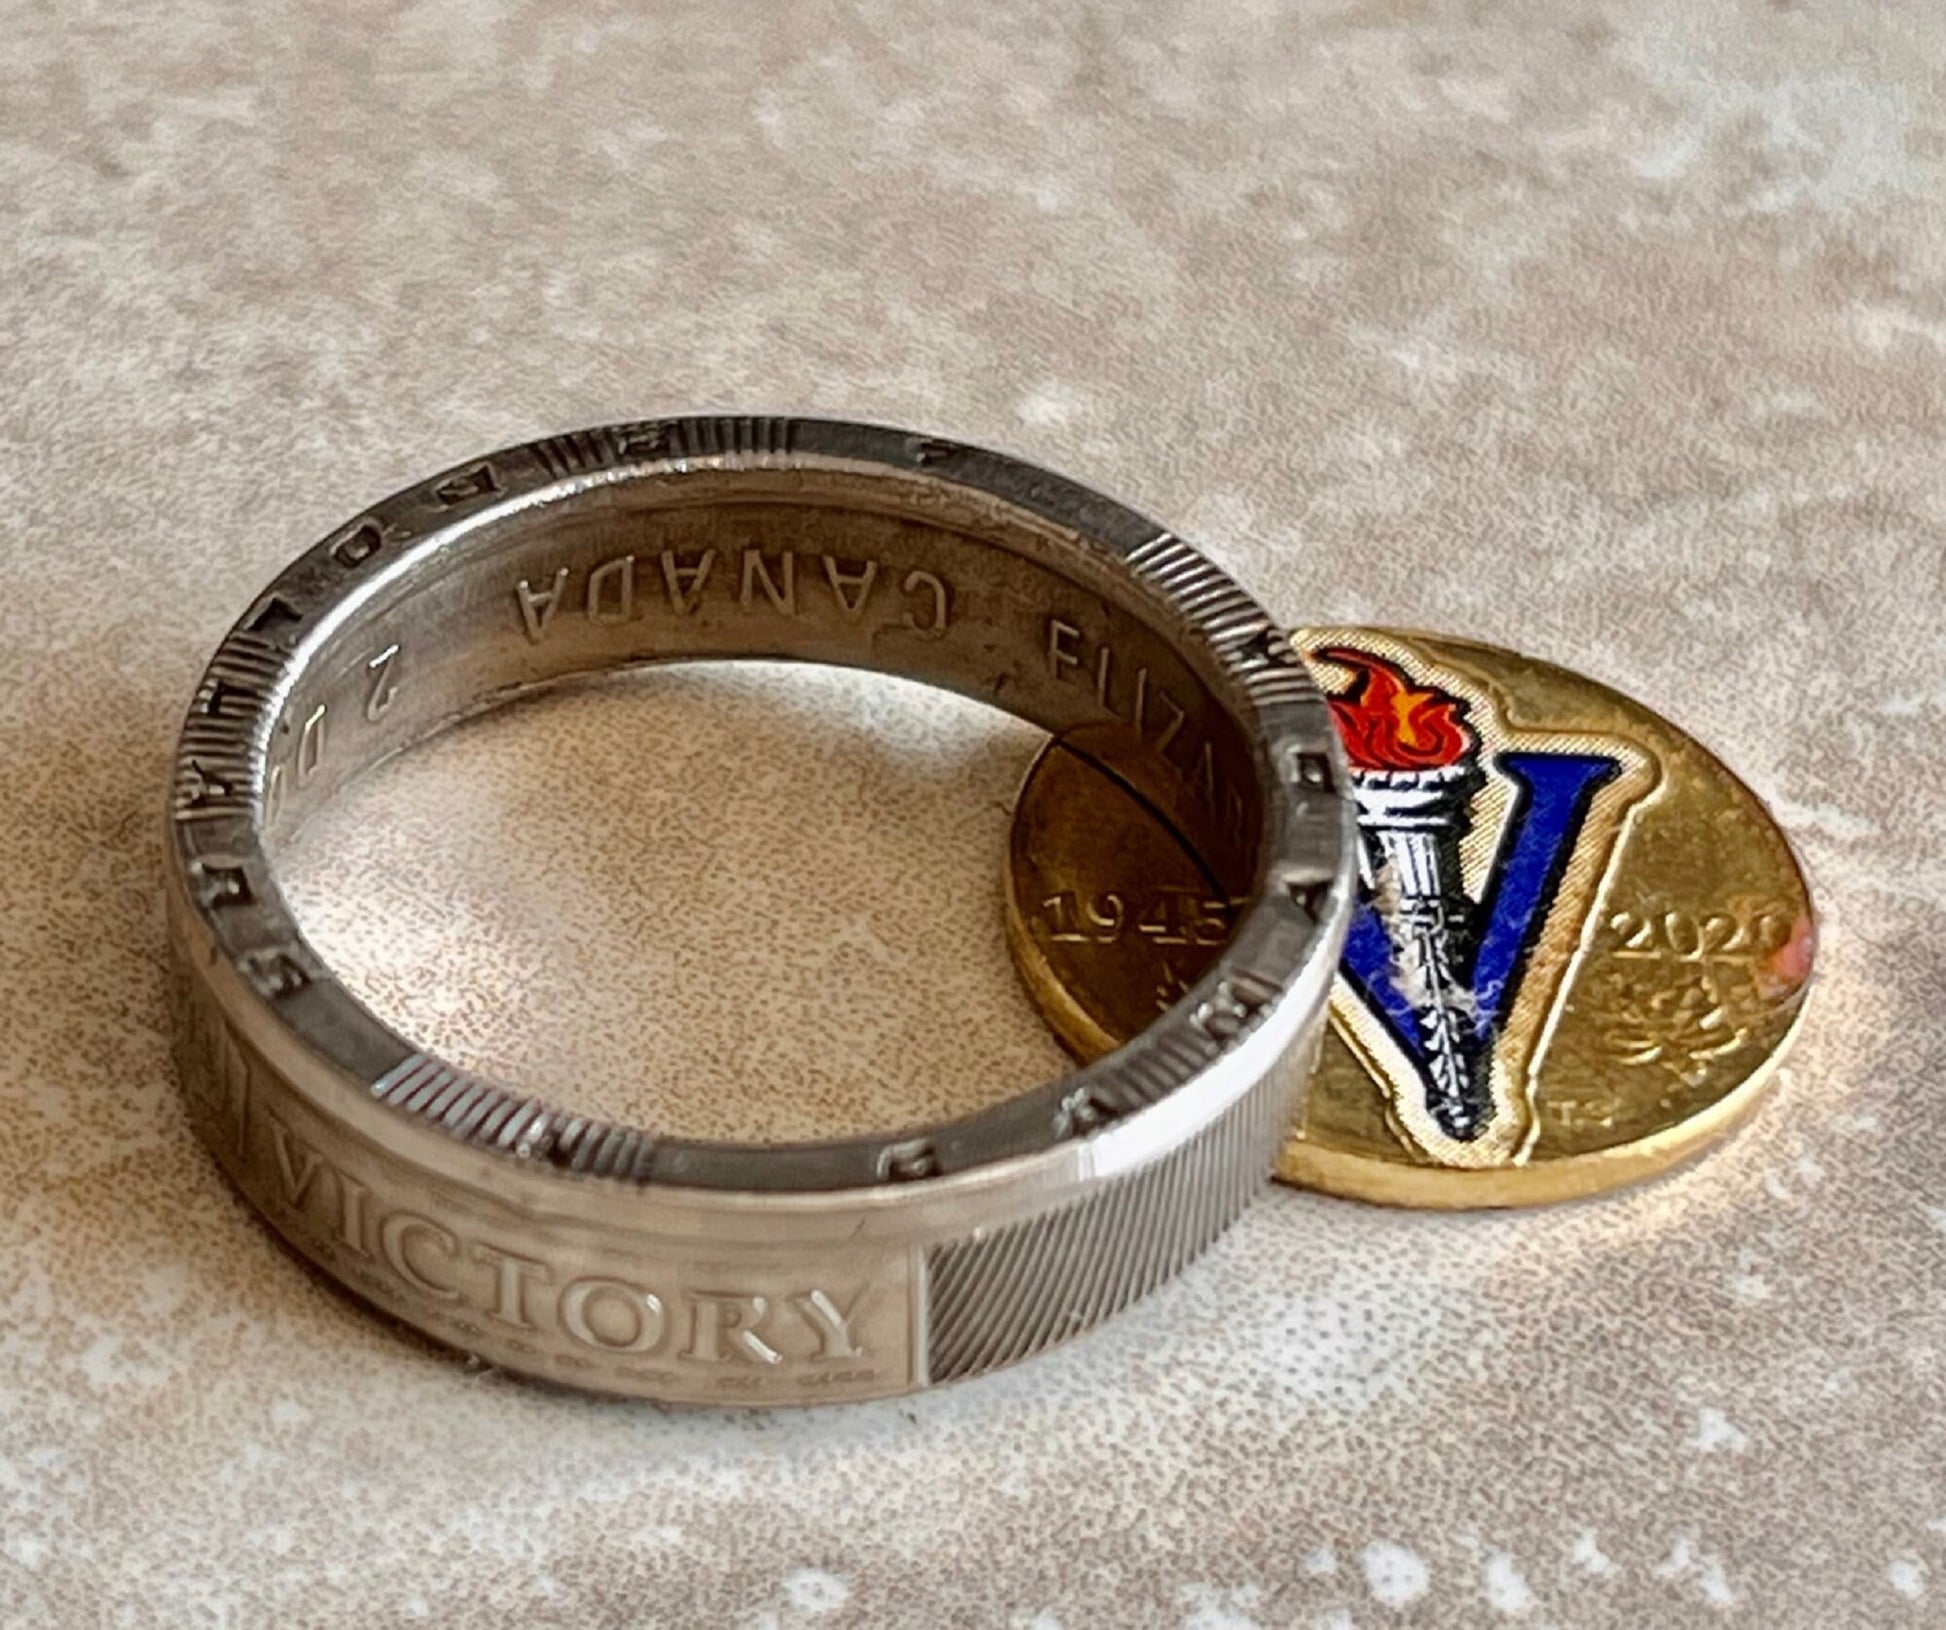 Canada Coin Ring Second World War 75th Anniversary Personal Custom Ring Gift For Friend Coin Ring Gift For Him Her World Coin Collector